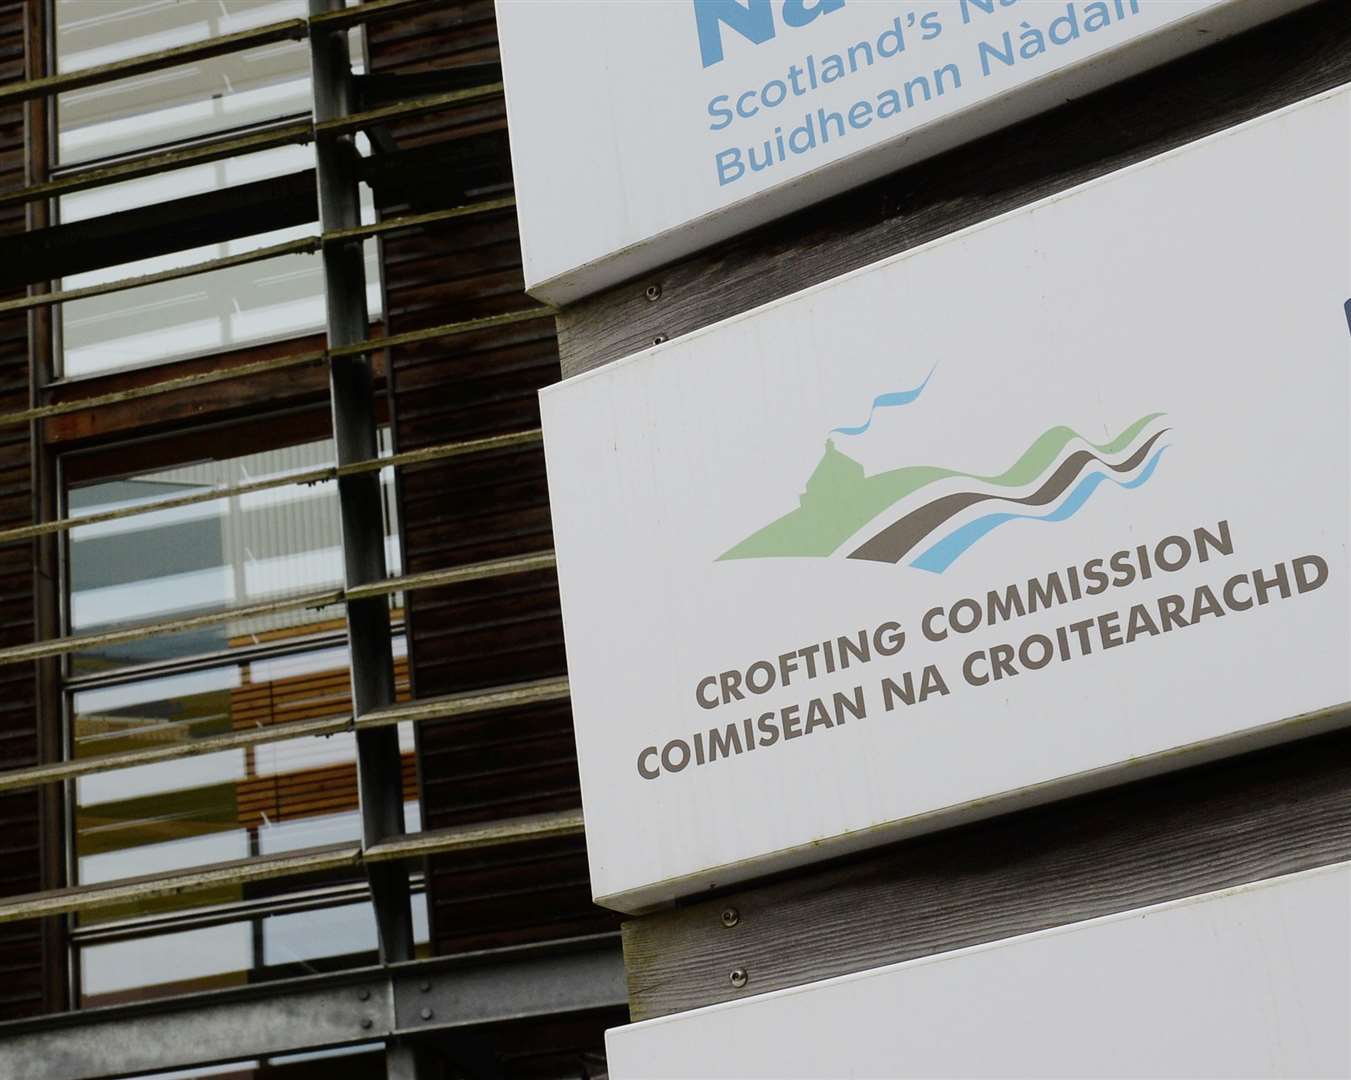 The Crofting Commission launched the digital application system this week.